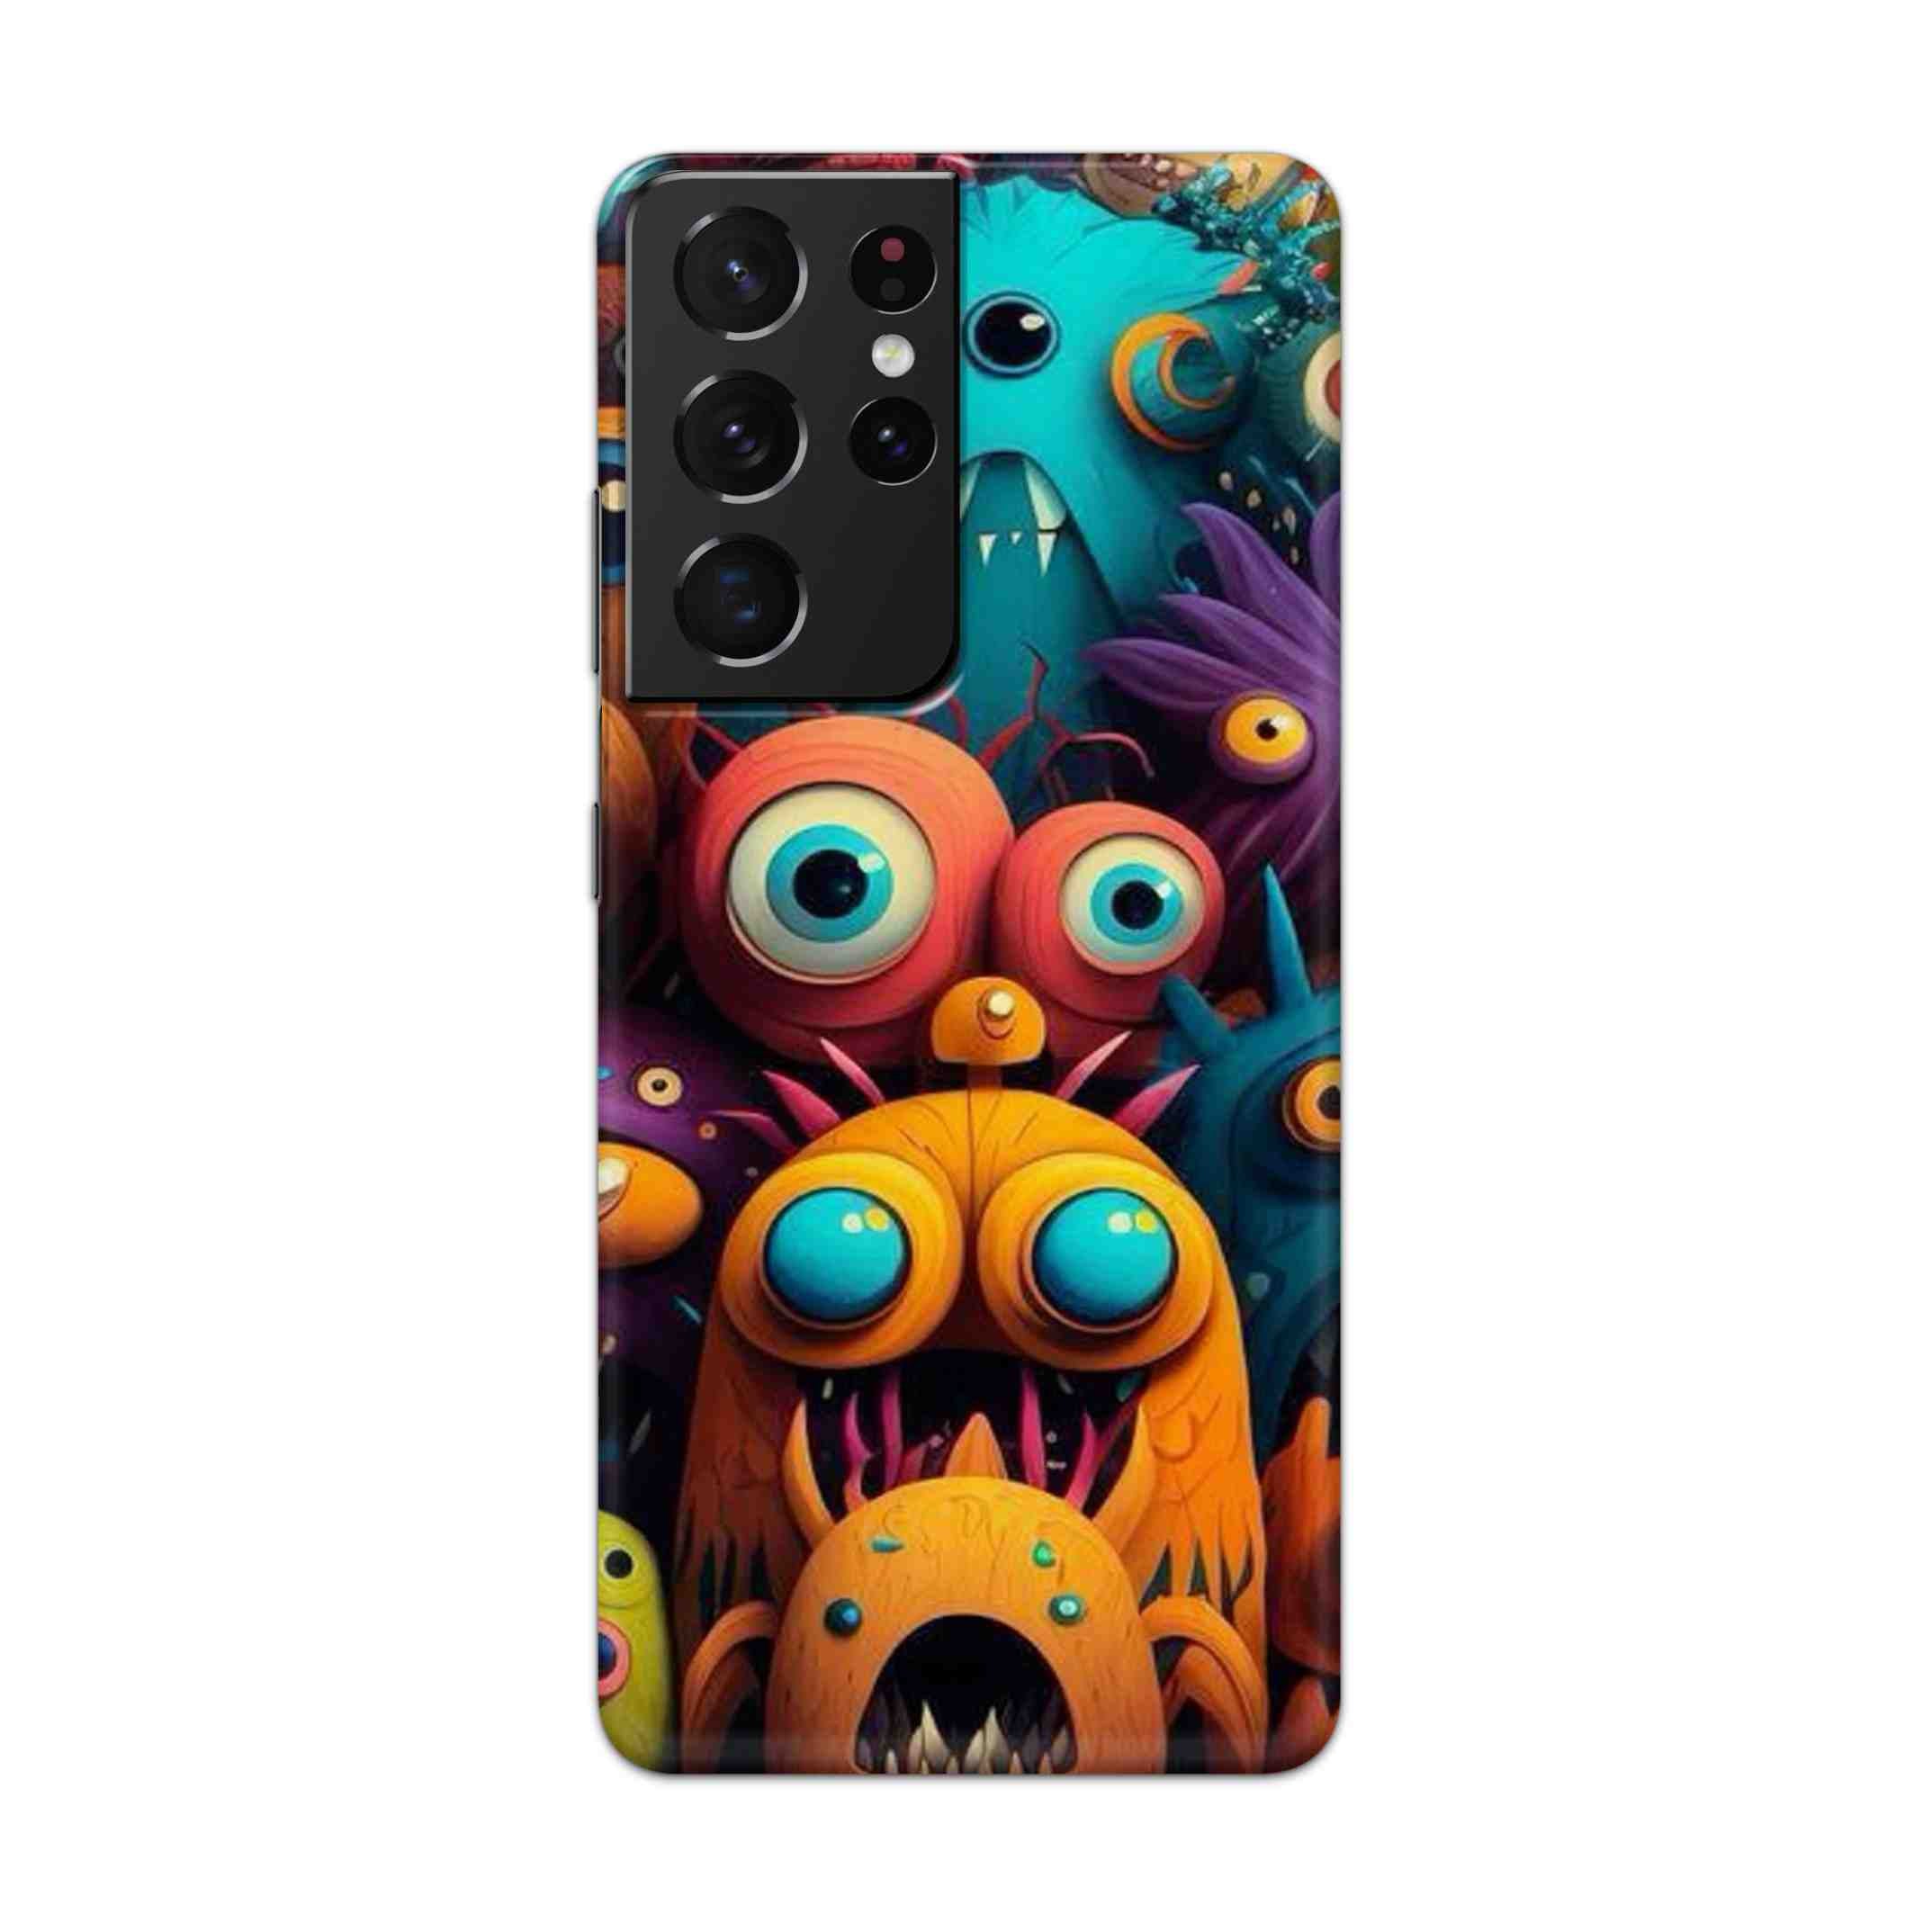 Buy Zombie Hard Back Mobile Phone Case Cover For Samsung Galaxy S21 Ultra Online